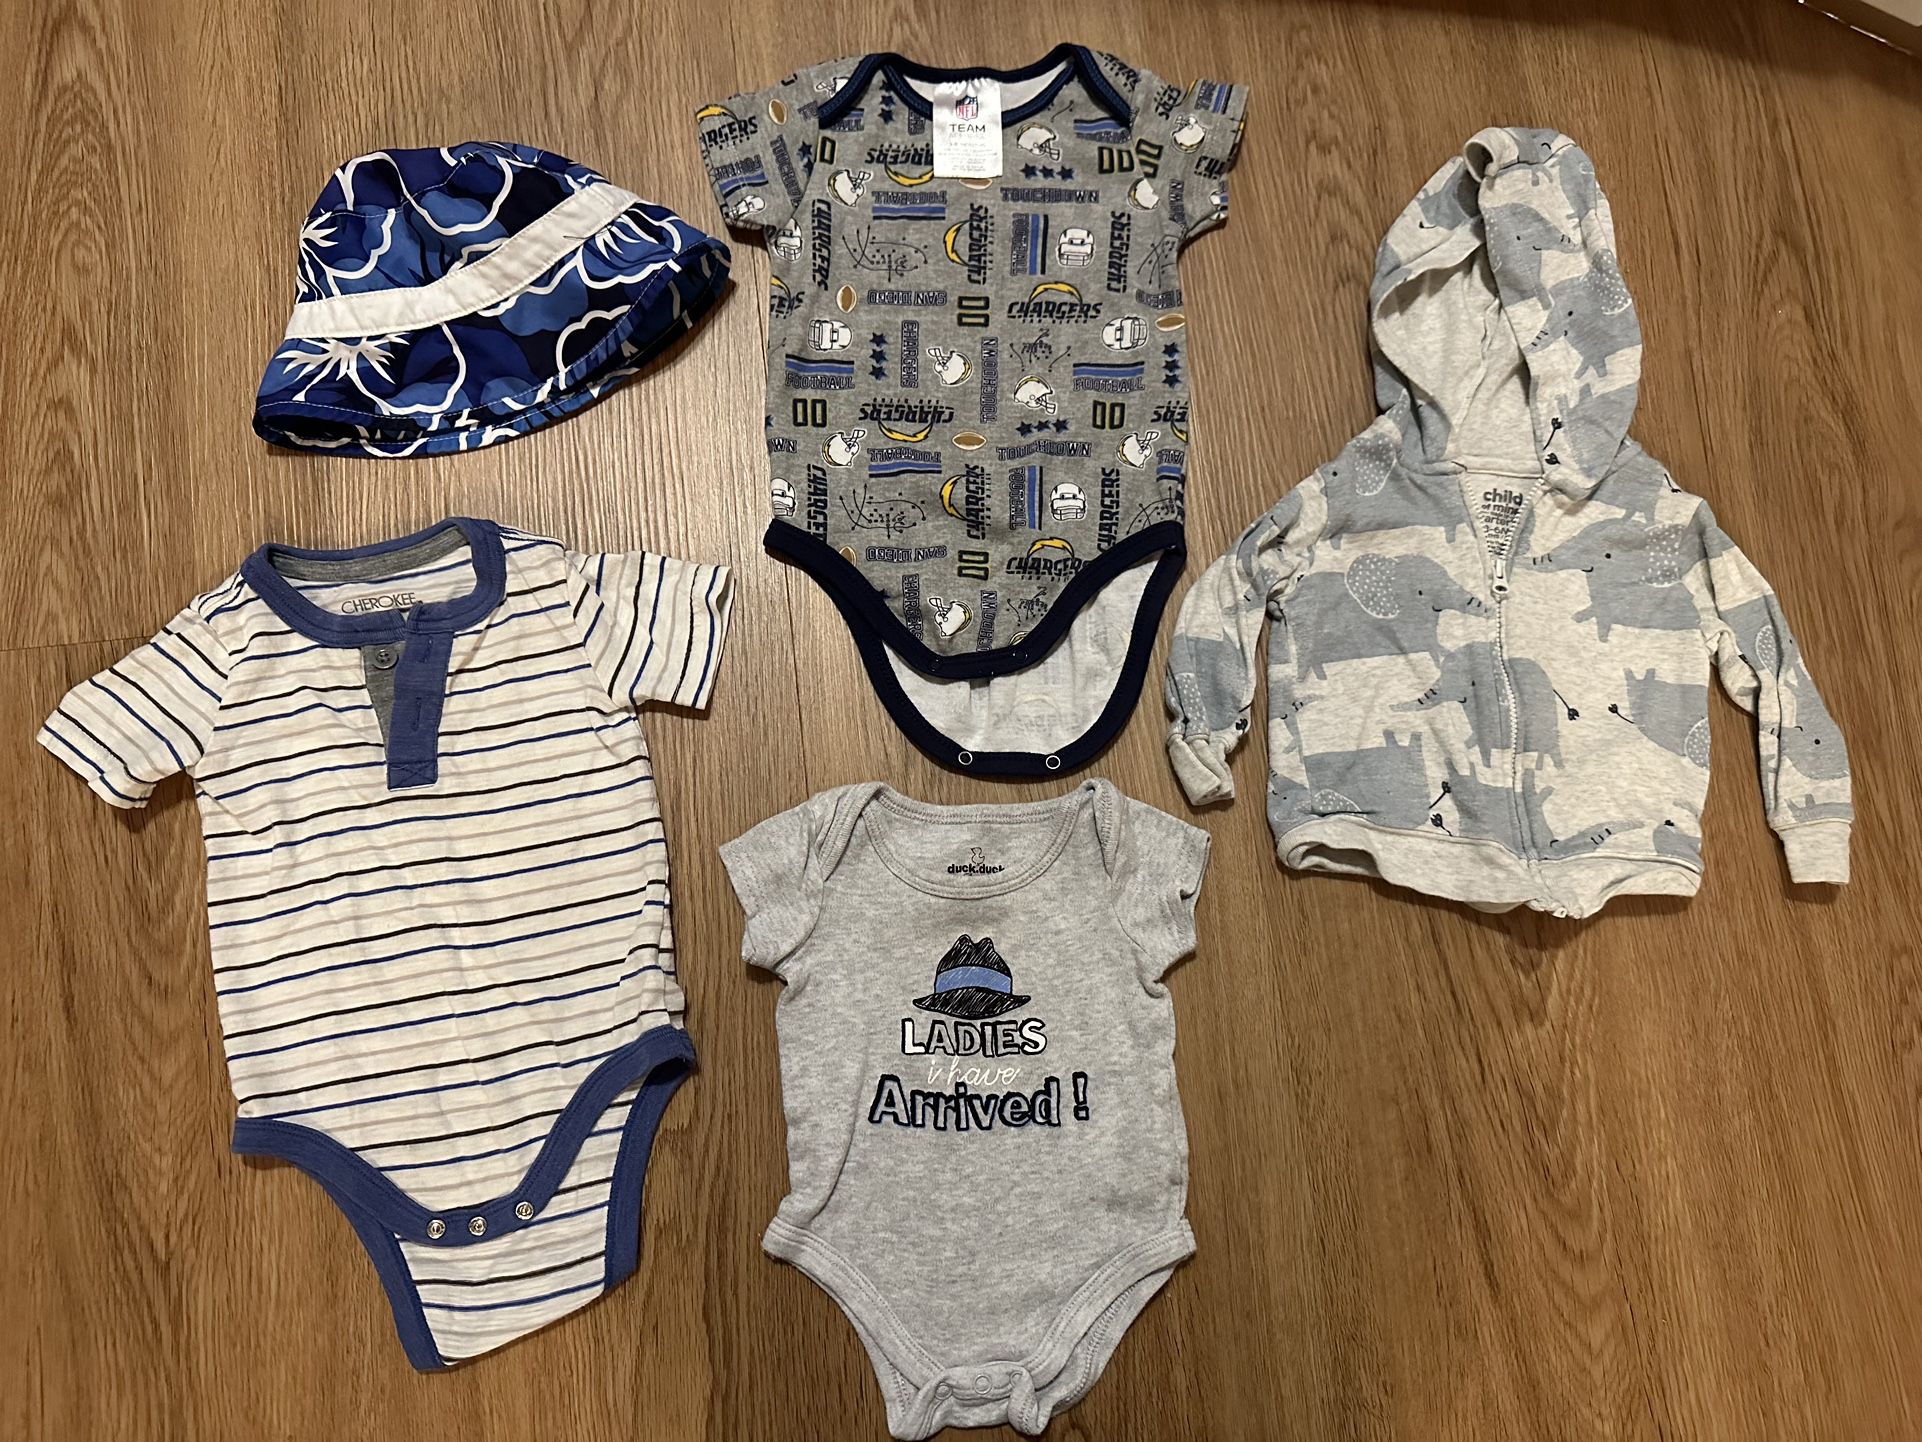 Lot Of Baby Boy Clothes 3-6 Months Grey/Blue Clothes Chargers Cherokee https://offerup.com/redirect/?o=RHVjay5kdWNr